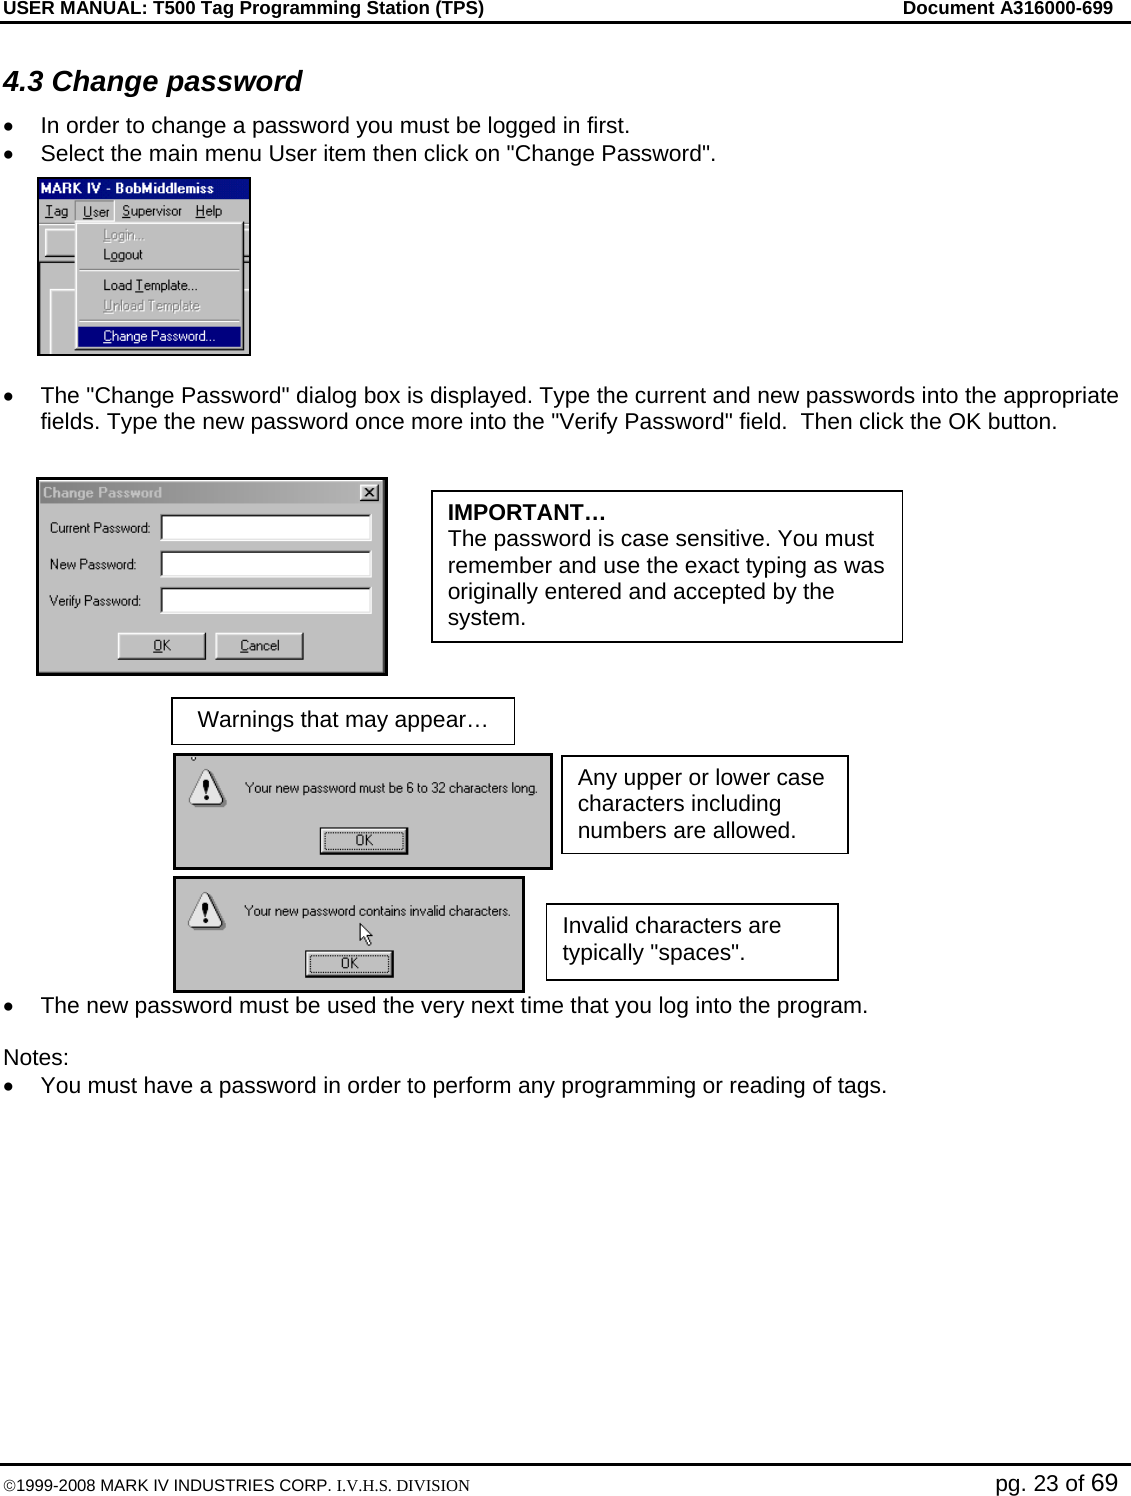 USER MANUAL: T500 Tag Programming Station (TPS)     Document A316000-699  ©1999-2008 MARK IV INDUSTRIES CORP. I.V.H.S. DIVISION   pg. 23 of 69 4.3 Change password •  In order to change a password you must be logged in first. •  Select the main menu User item then click on &quot;Change Password&quot;.  •  The &quot;Change Password&quot; dialog box is displayed. Type the current and new passwords into the appropriate fields. Type the new password once more into the &quot;Verify Password&quot; field.  Then click the OK button.     •  The new password must be used the very next time that you log into the program.  Notes: •  You must have a password in order to perform any programming or reading of tags.  Warnings that may appear… Invalid characters are typically &quot;spaces&quot;. Any upper or lower case characters including numbers are allowed. IMPORTANT… The password is case sensitive. You must remember and use the exact typing as was originally entered and accepted by the system. 